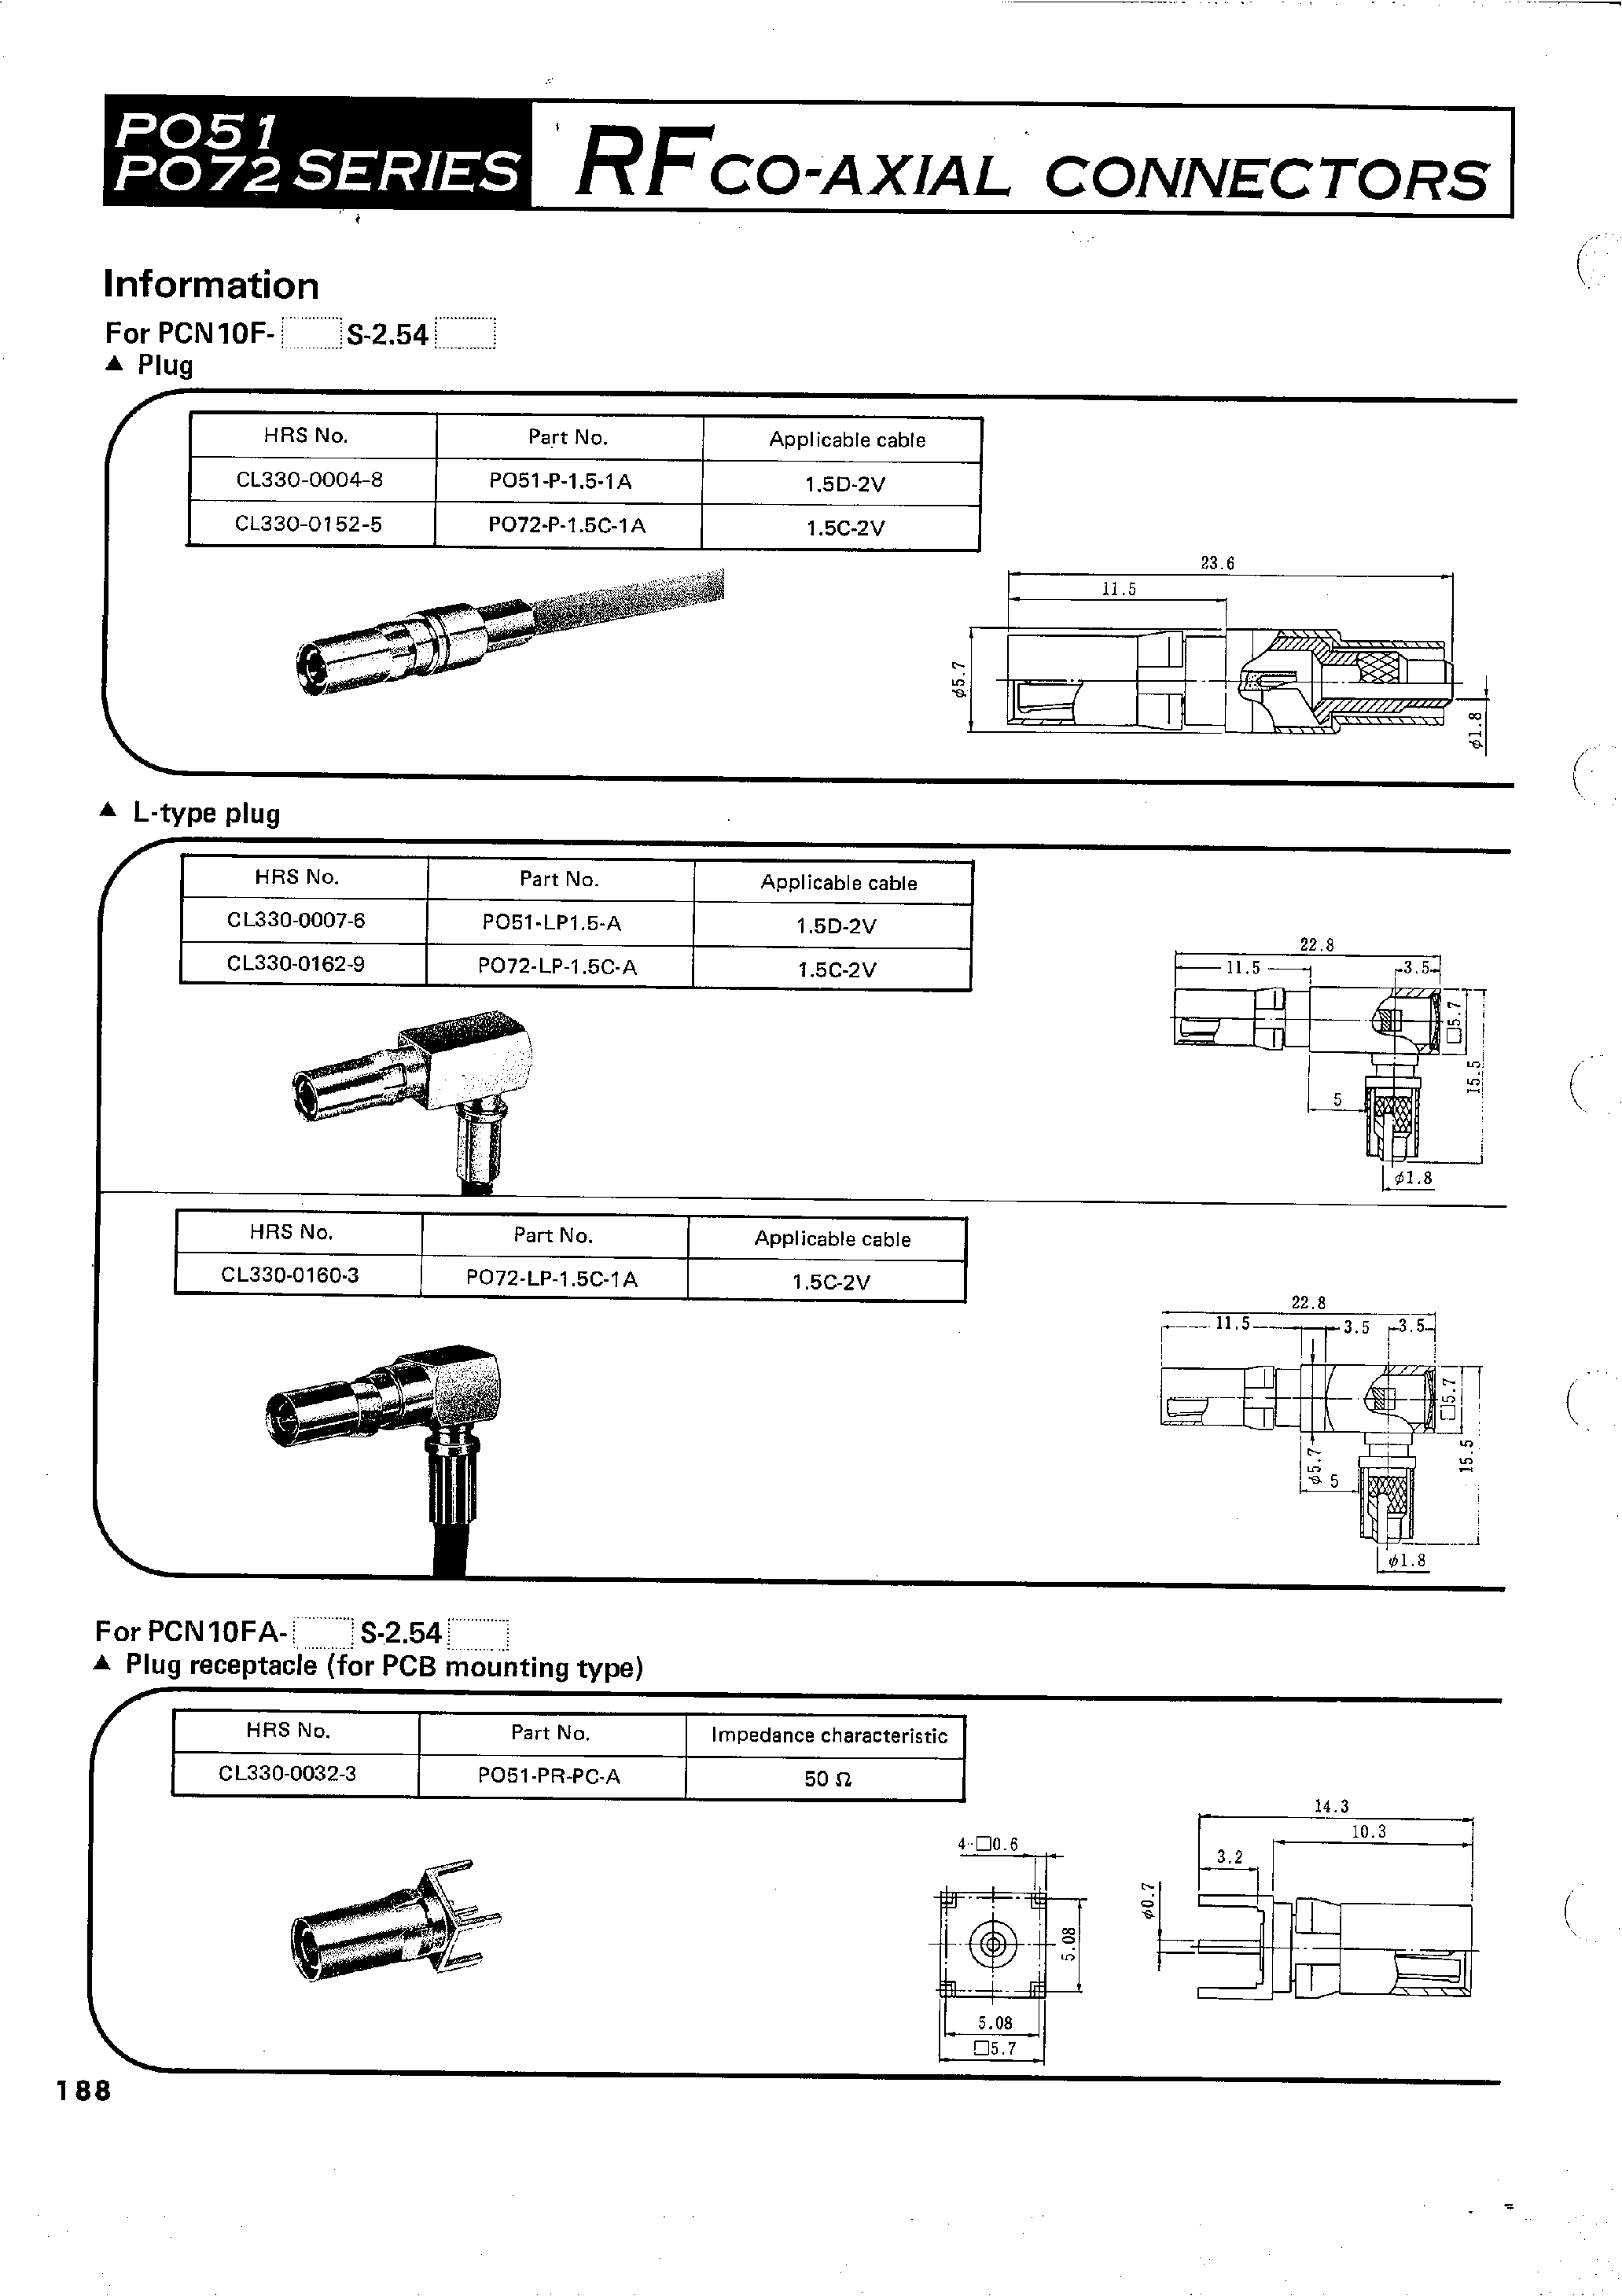 Datasheet PO51J-T-1 - RFCO-AXIAL CONNECTORS page 2